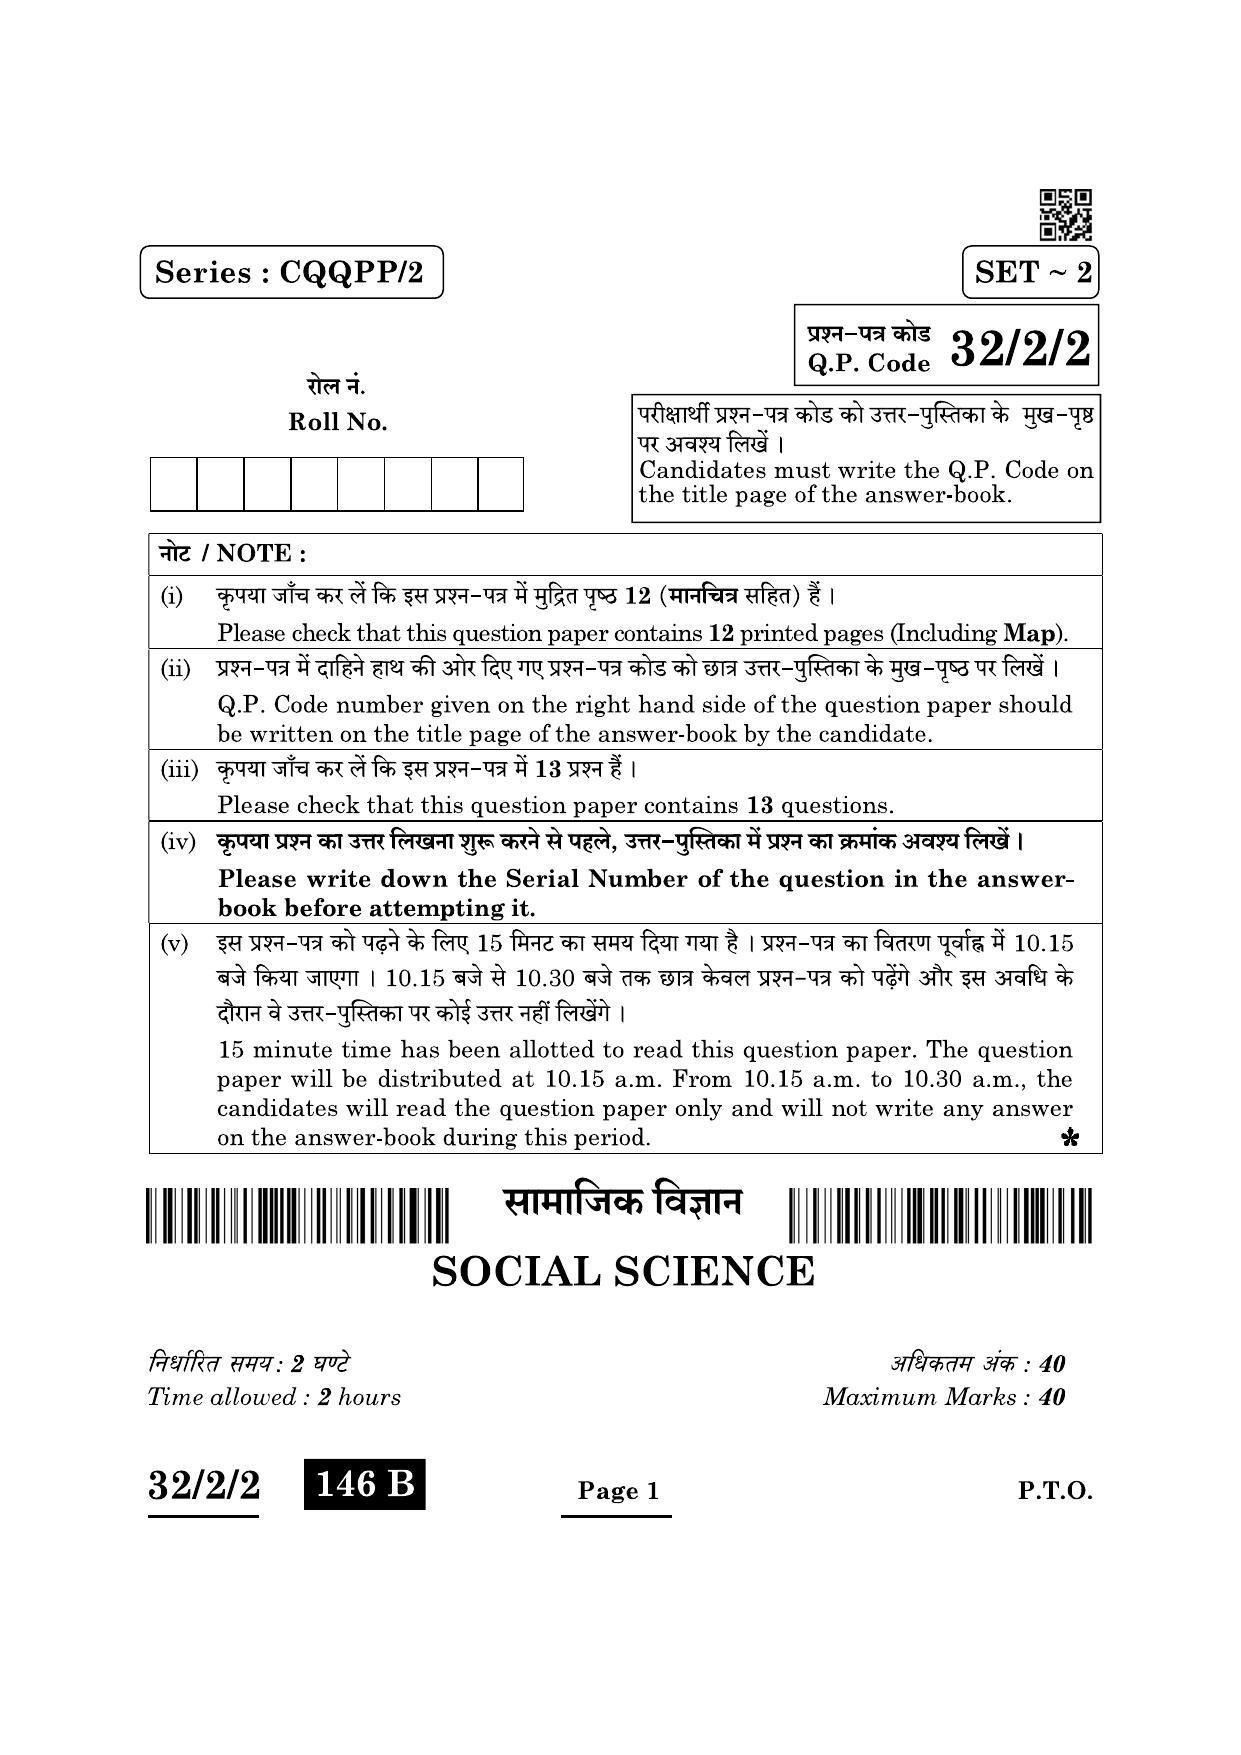 CBSE Class 10 32-2-2 Social Science 2022 Question Paper - Page 1